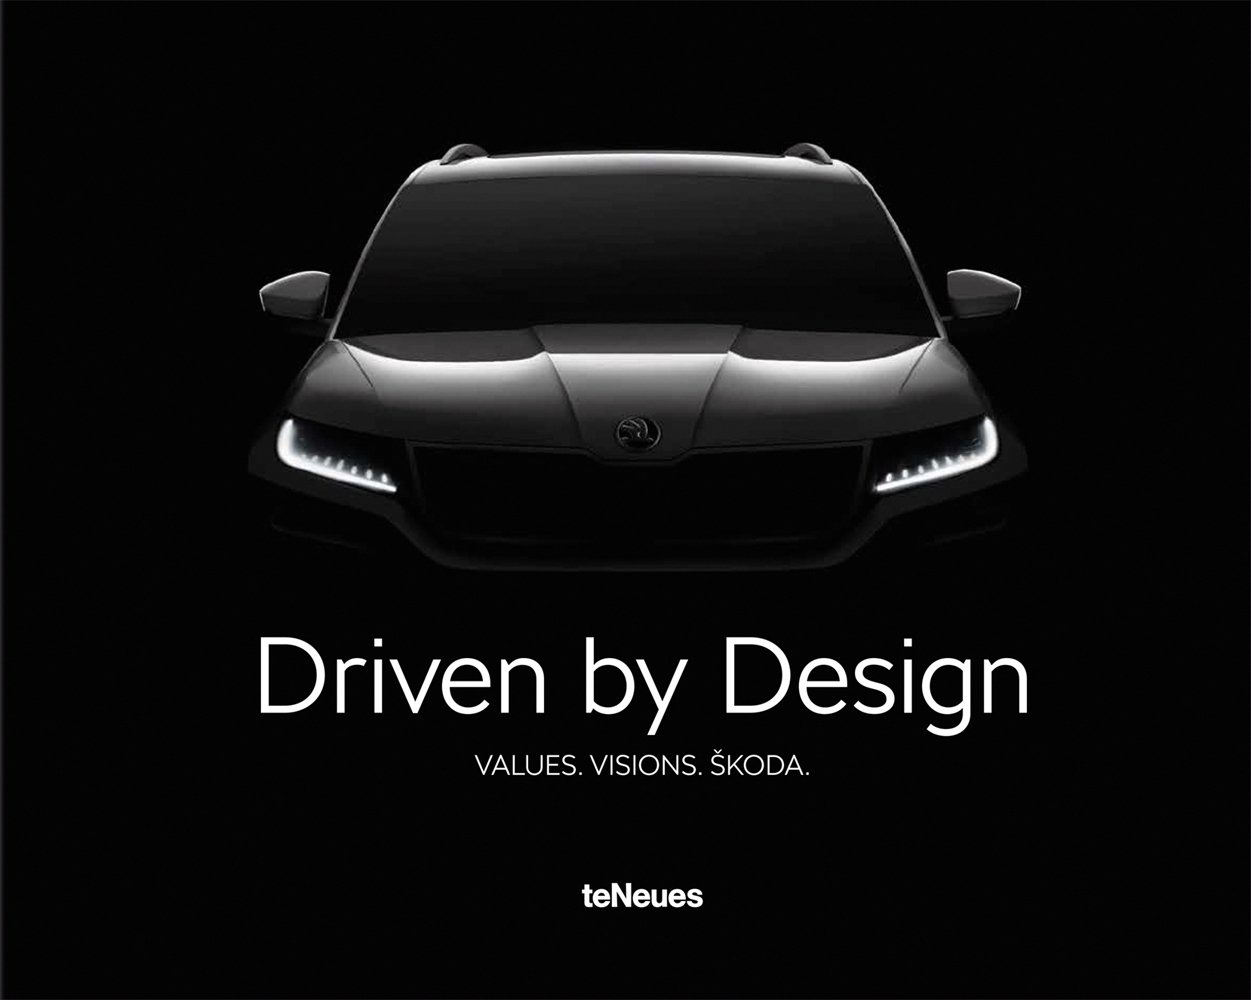 SKODA car model with front lights on, on black cover, 'Driven by Design', in white font below, by teNeues Books.